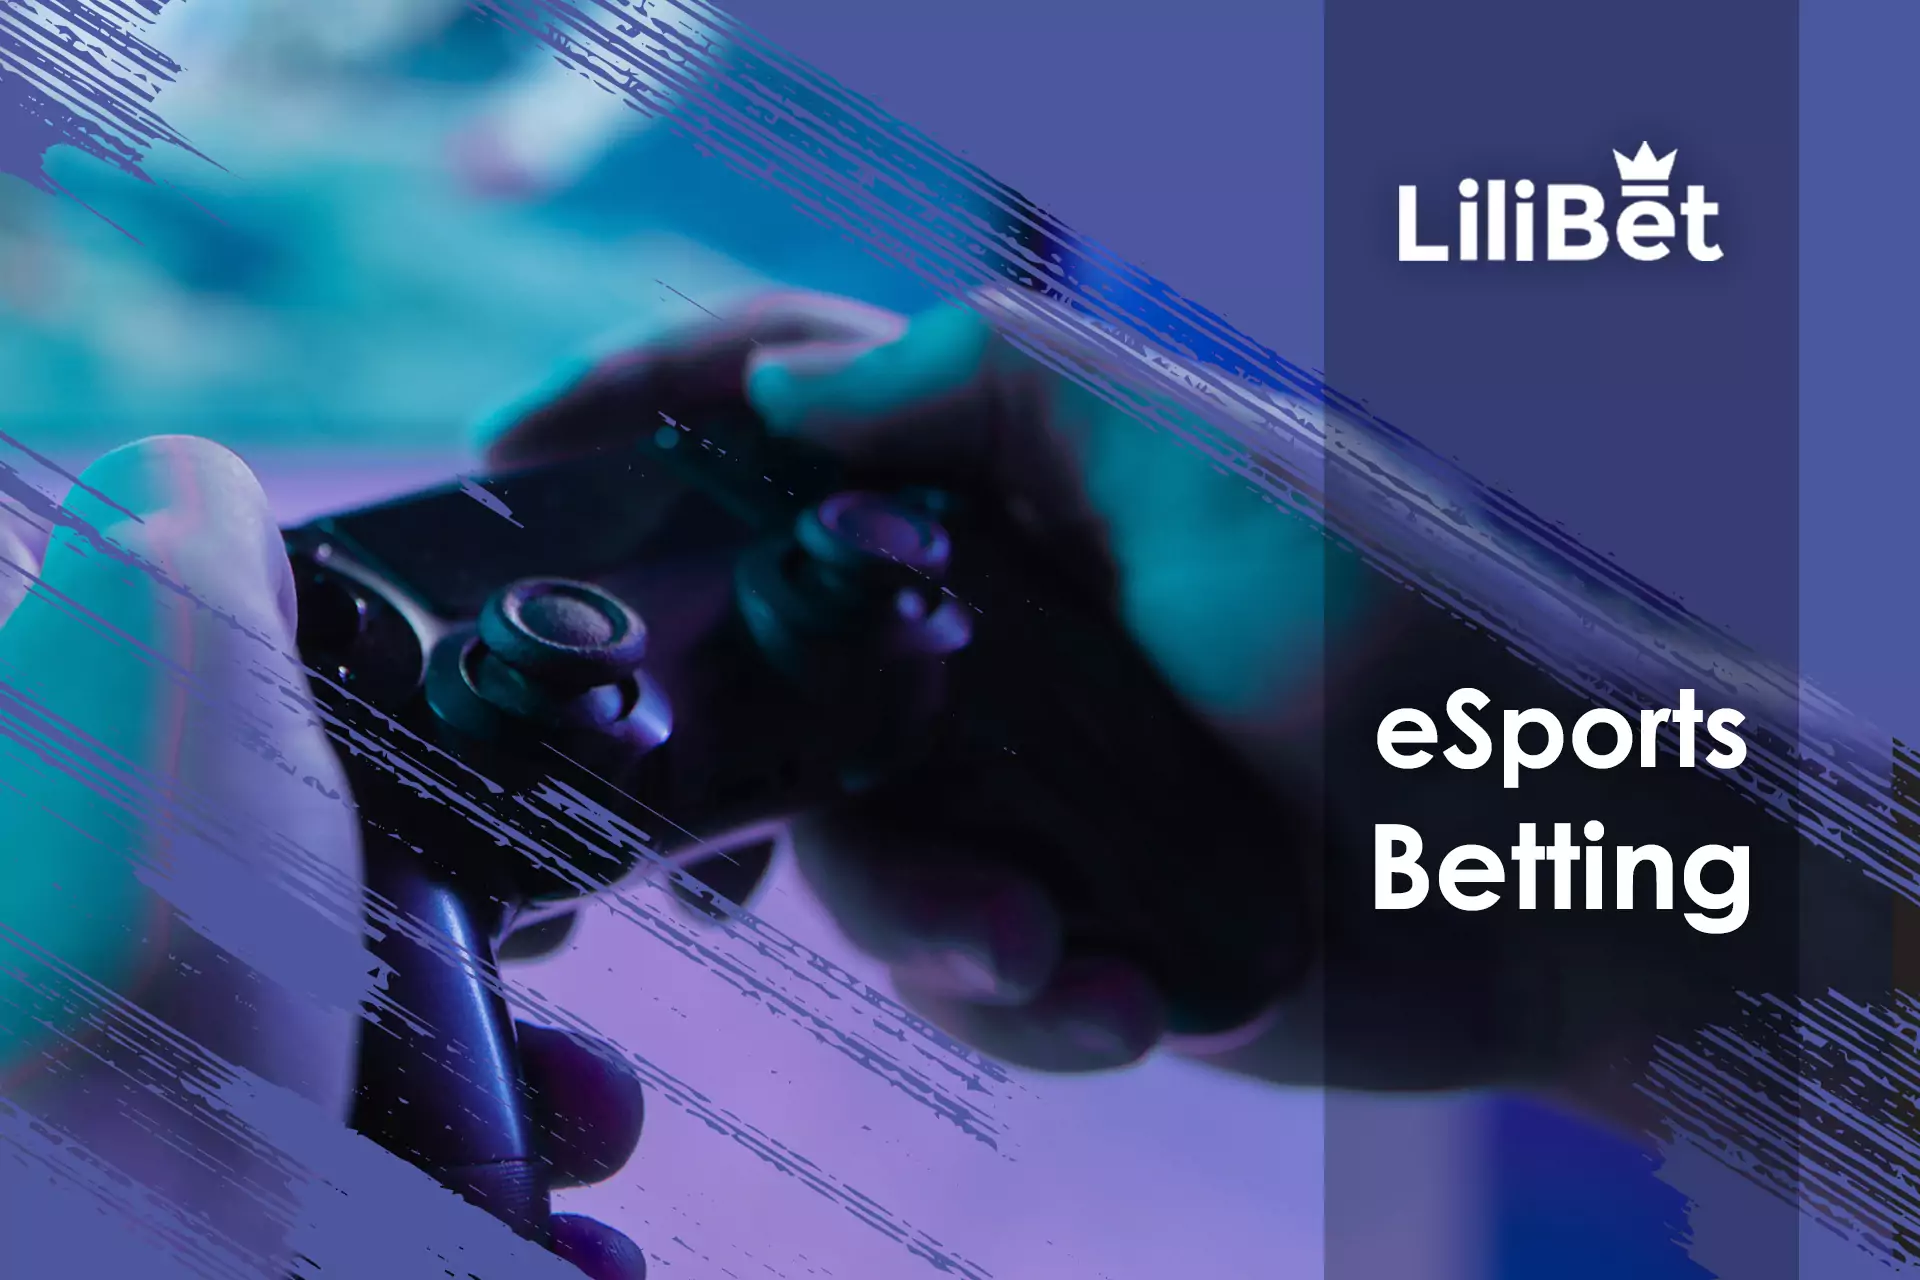 If you are a true fan of watching esports matches, you can place a bet at Lilibet as well.